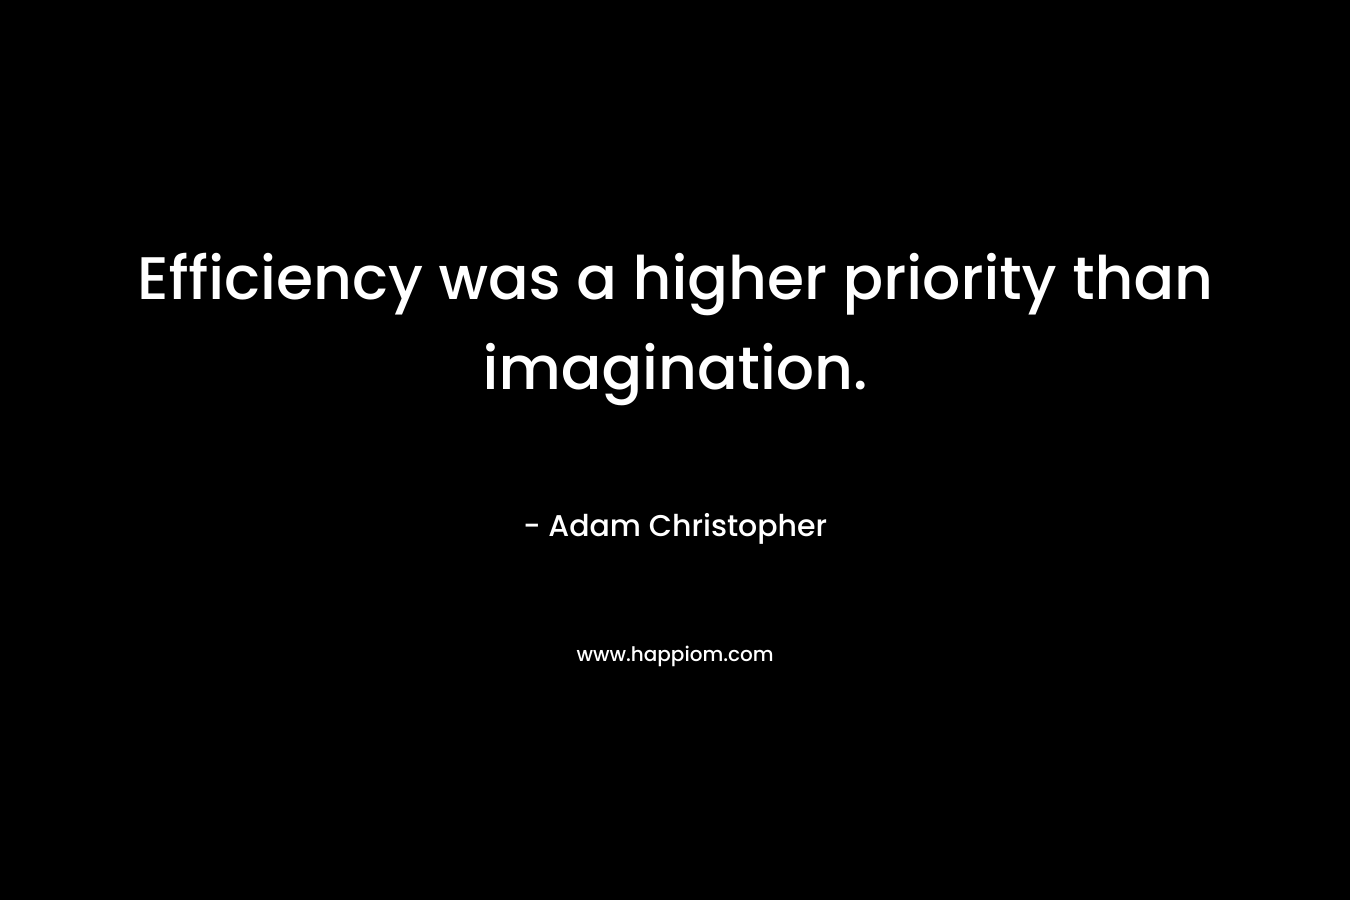 Efficiency was a higher priority than imagination. – Adam Christopher